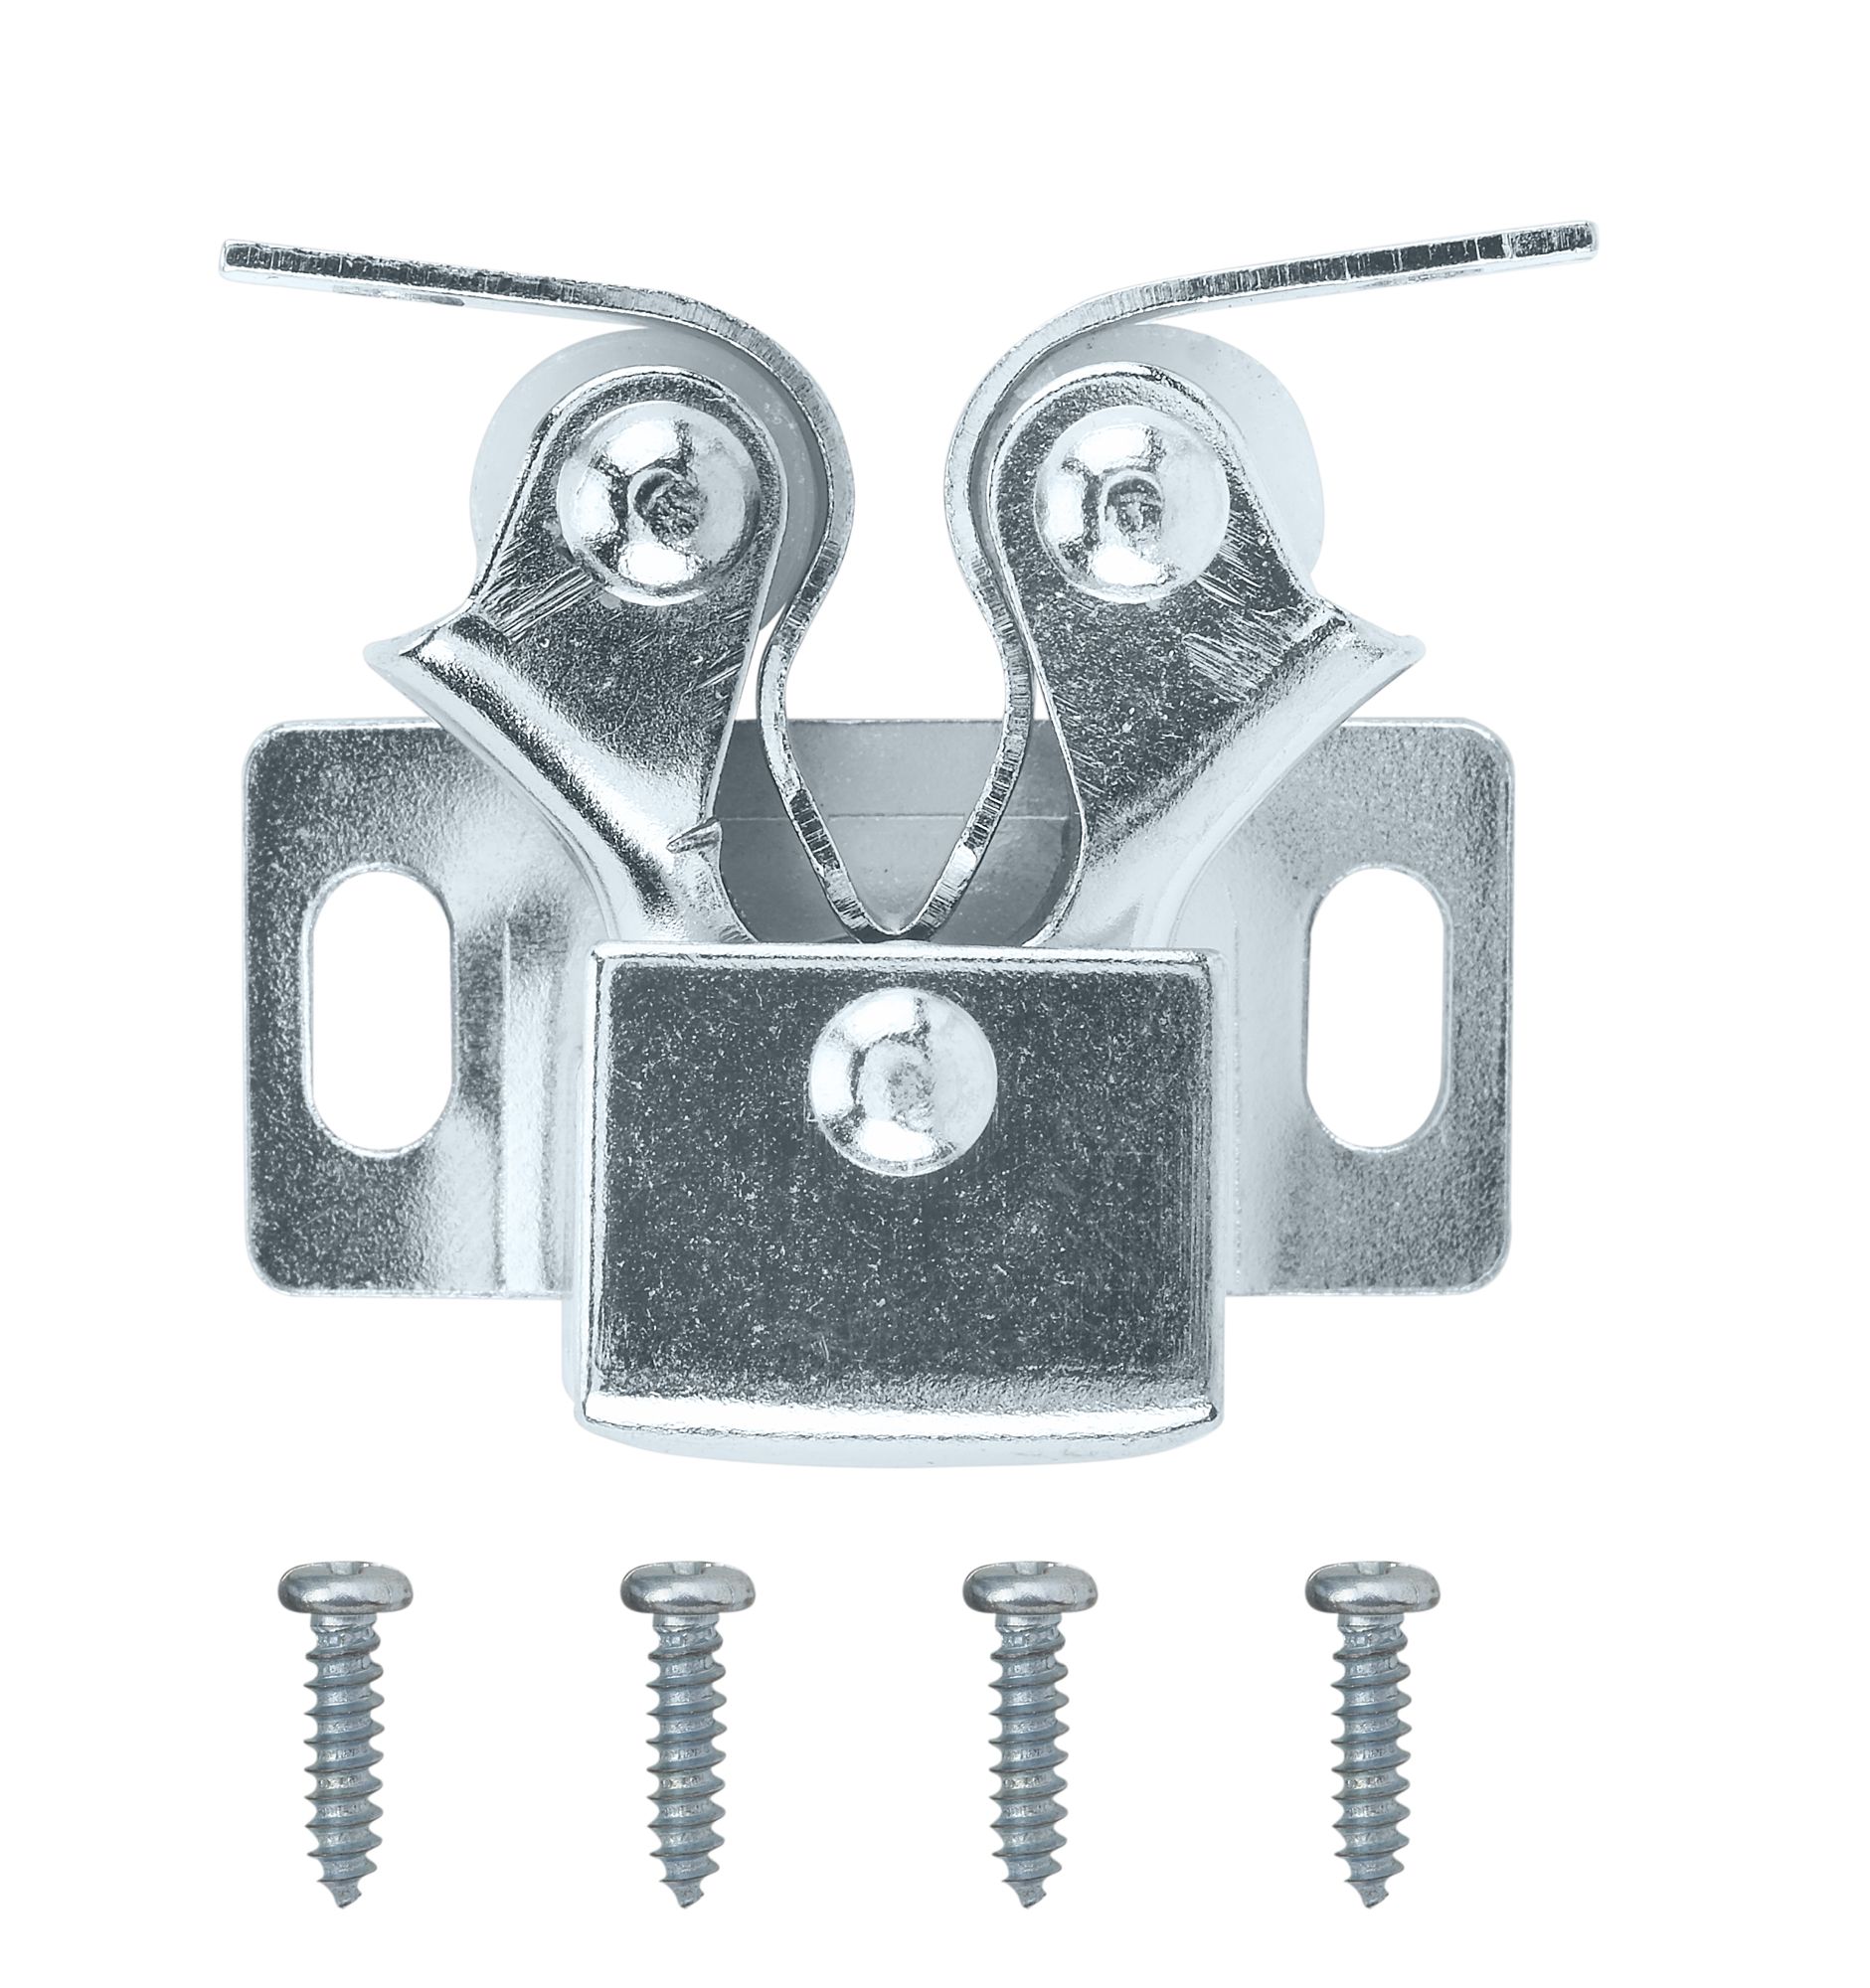 Zinc-plated Carbon steel Double roller catch